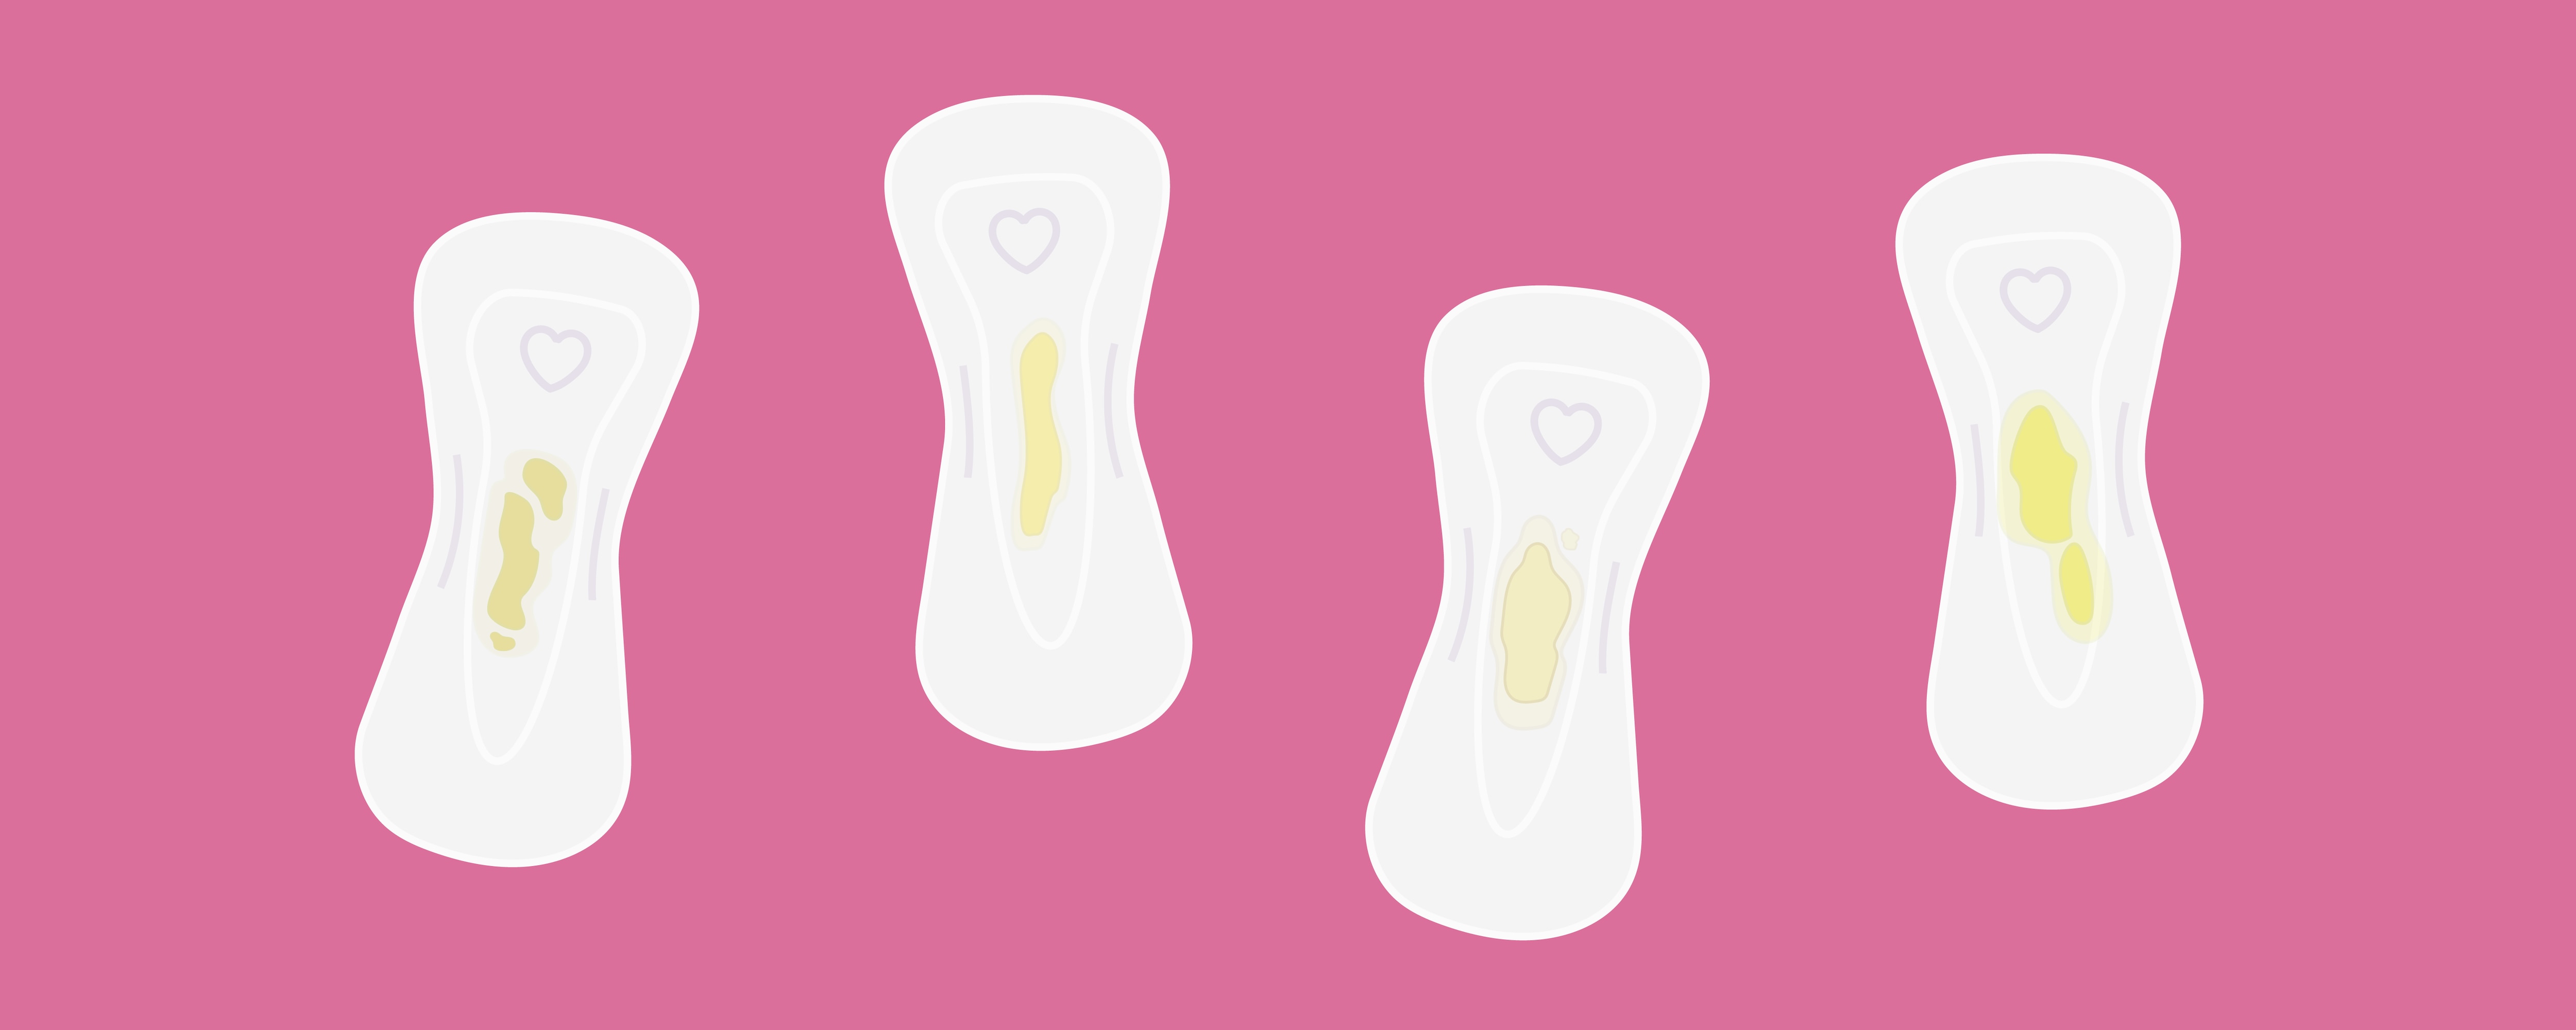 Brown spotting before your period? It's totally normal! Learn why